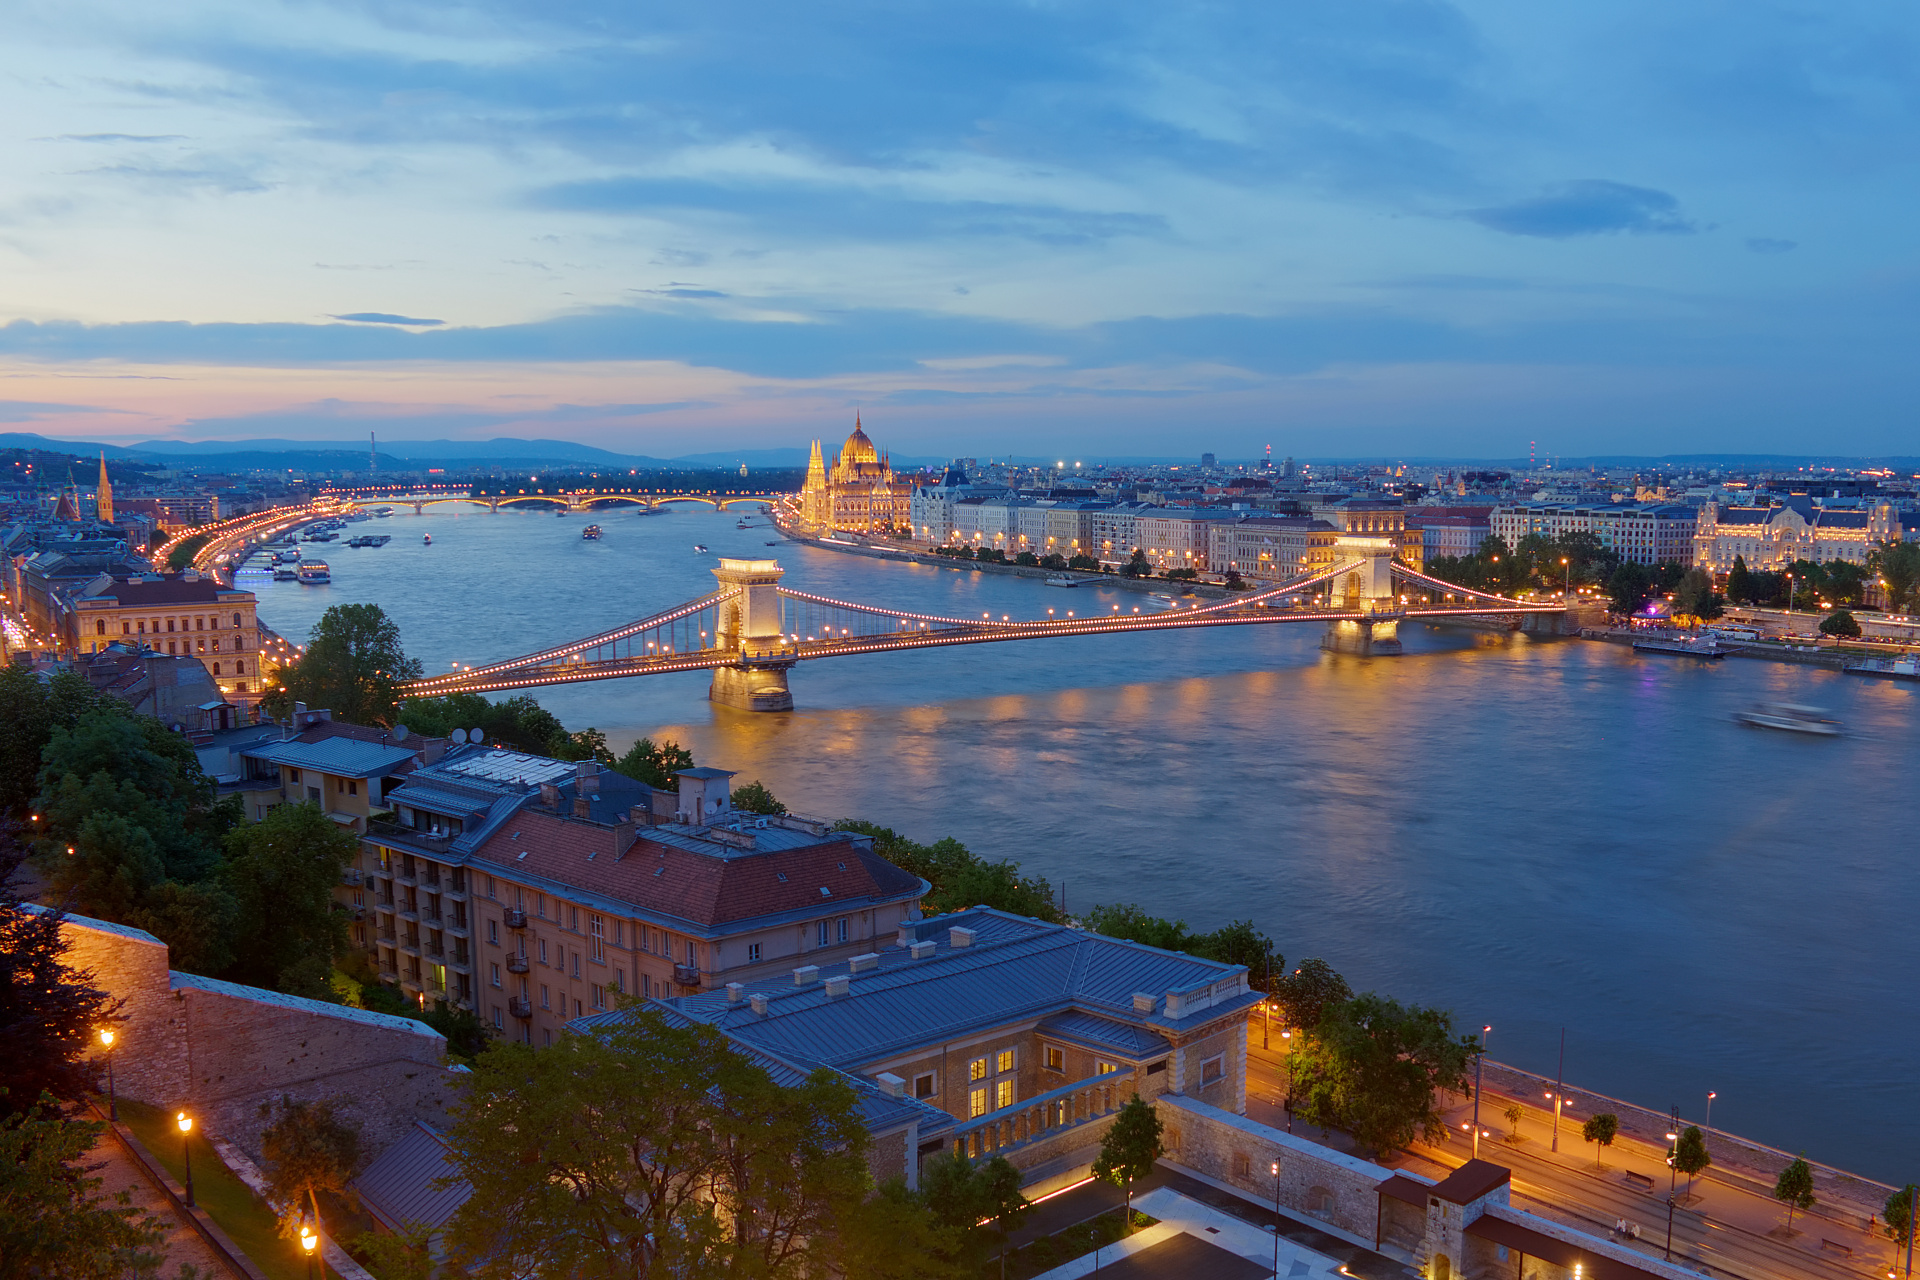 Danube and Pest from Buda Castle (Travels » Budapest » Budapest at Night)